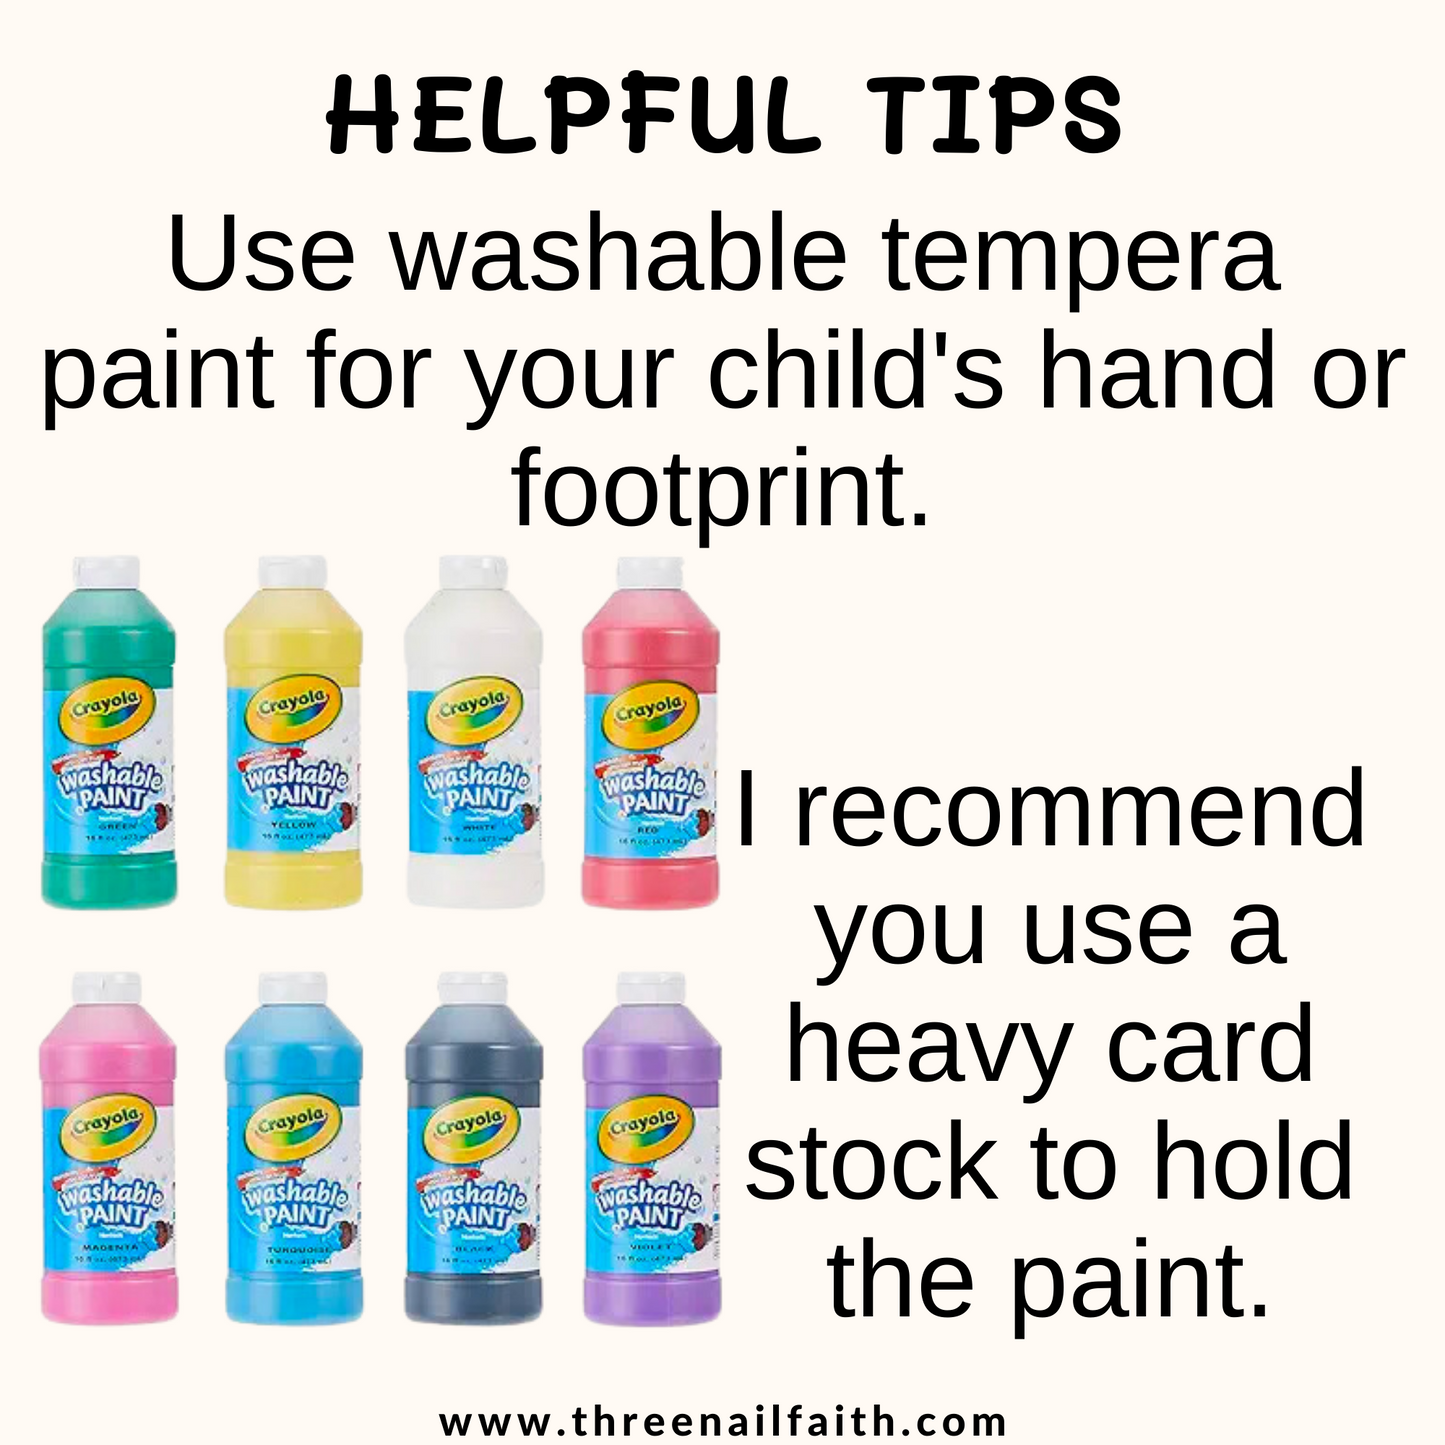 recommended paint is washable tempera paint. also recommened is it you cardstock for printing